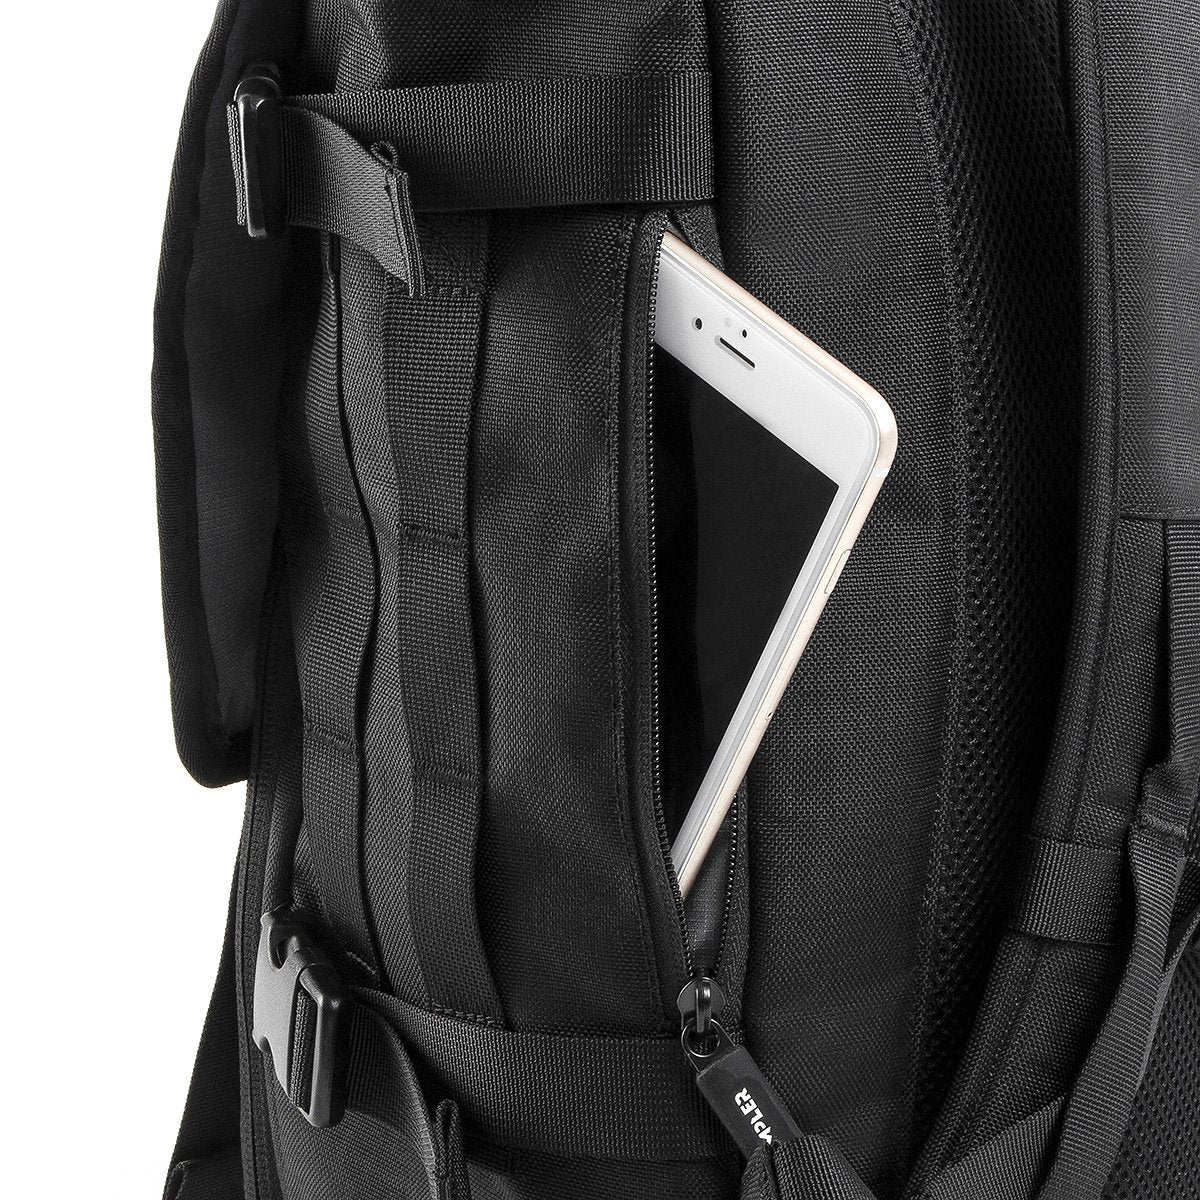 FrontRow Camera Half Backpack